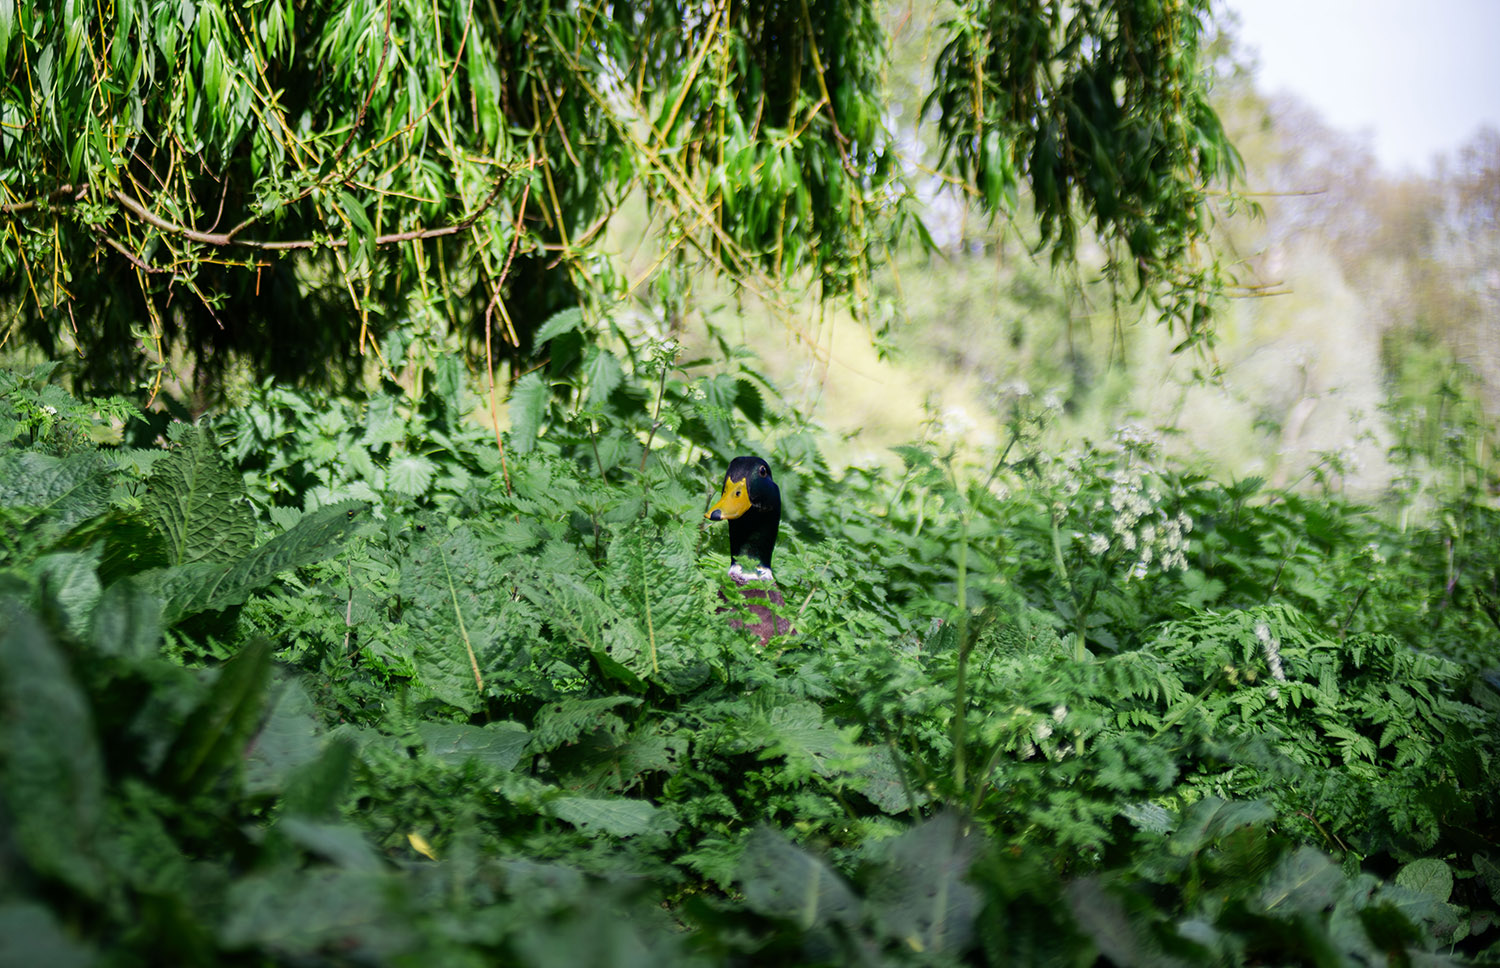 A duck peeks out from dense shrubs